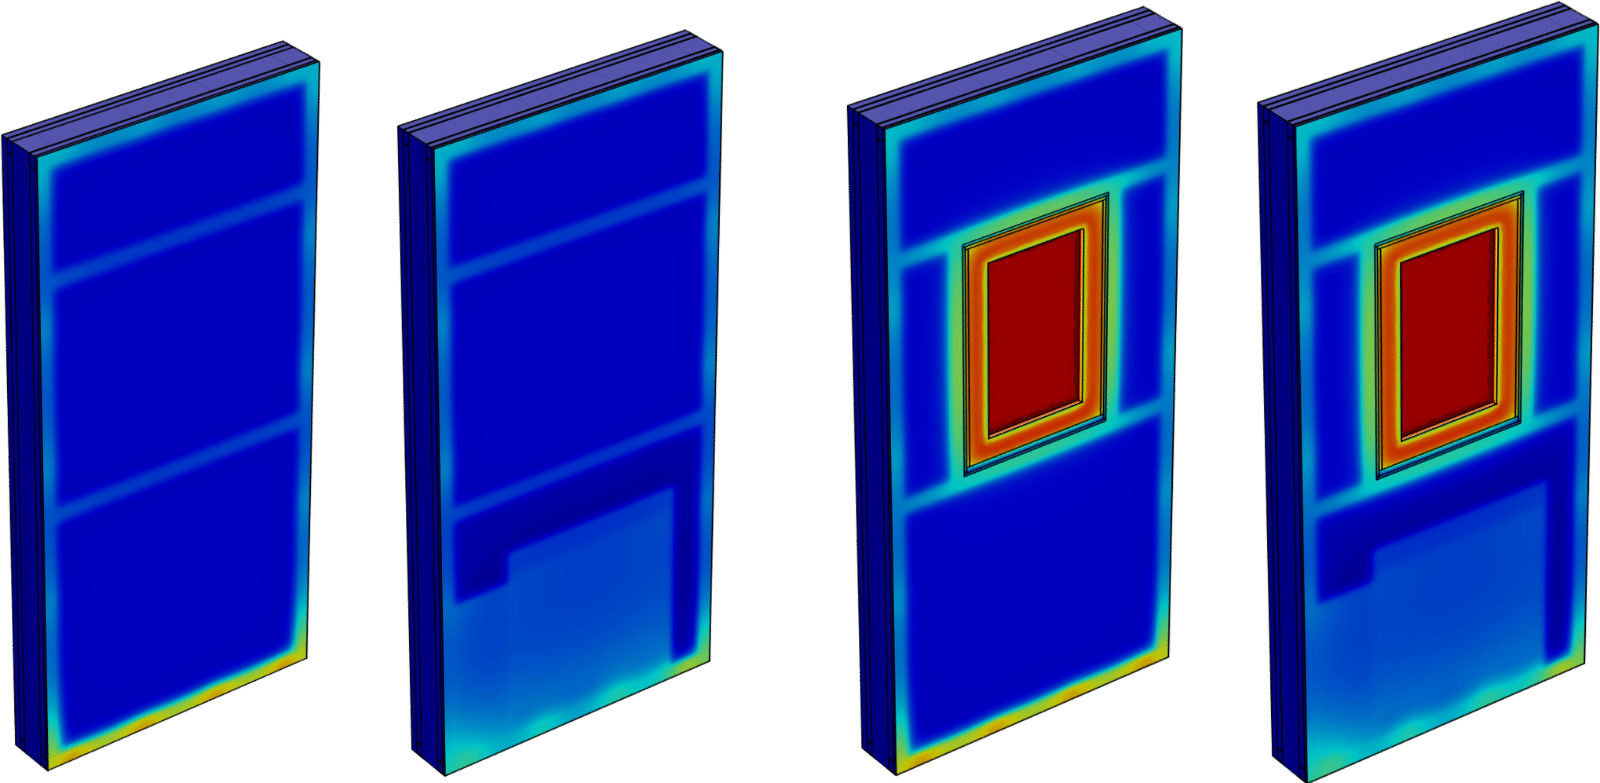 U-value contour for the four types of SmartWall system in COMSOL software